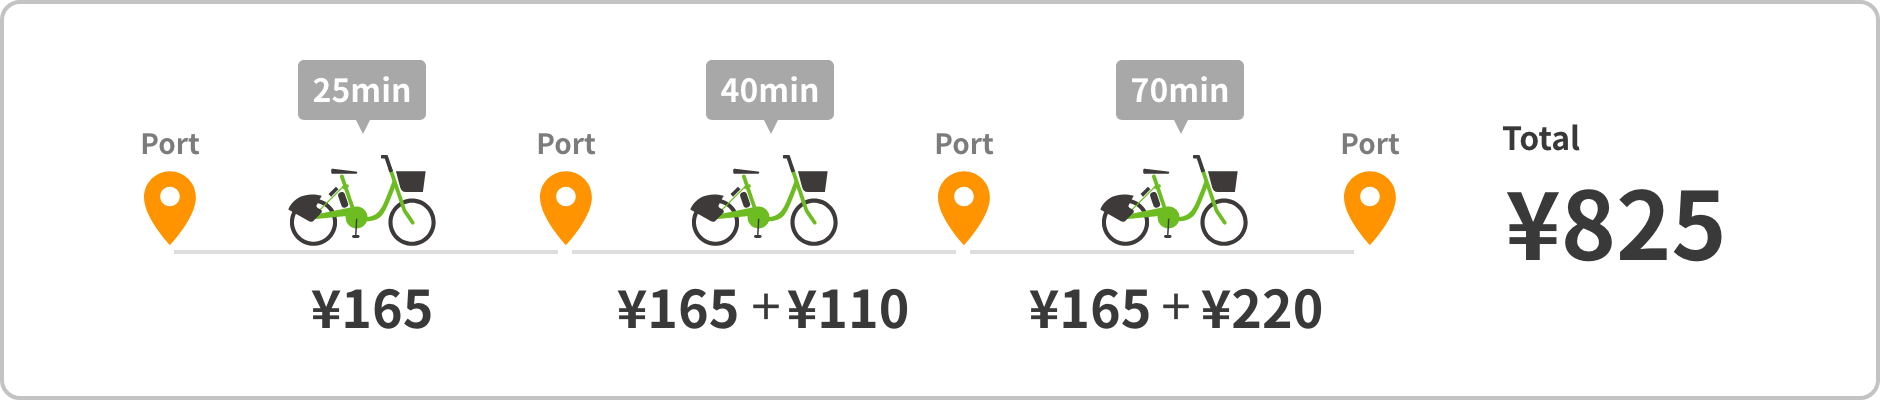 If you do not return bicycle to the port within 30 minutes additional fees will be charged.